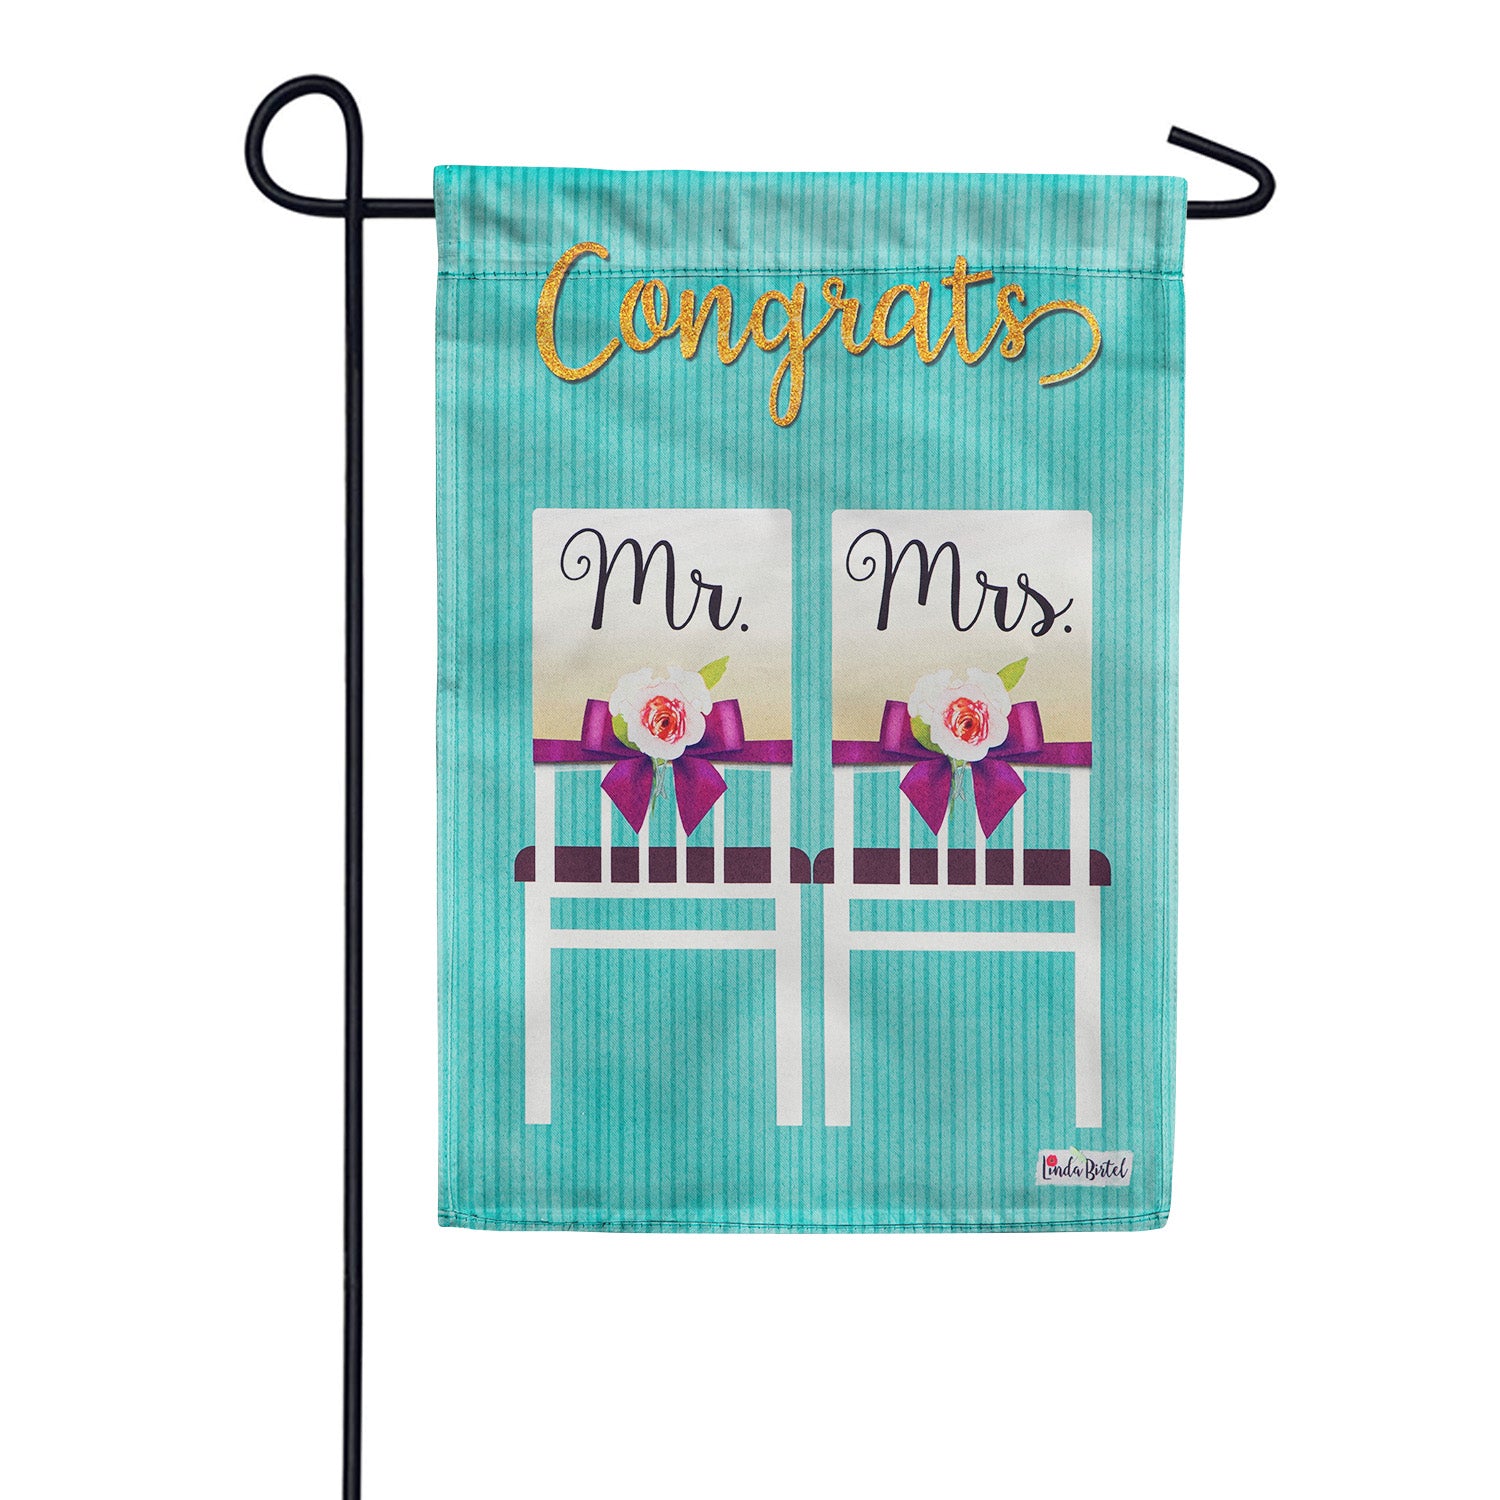 Mr. and Mrs. Chairs Suede Double Sided Garden Flag